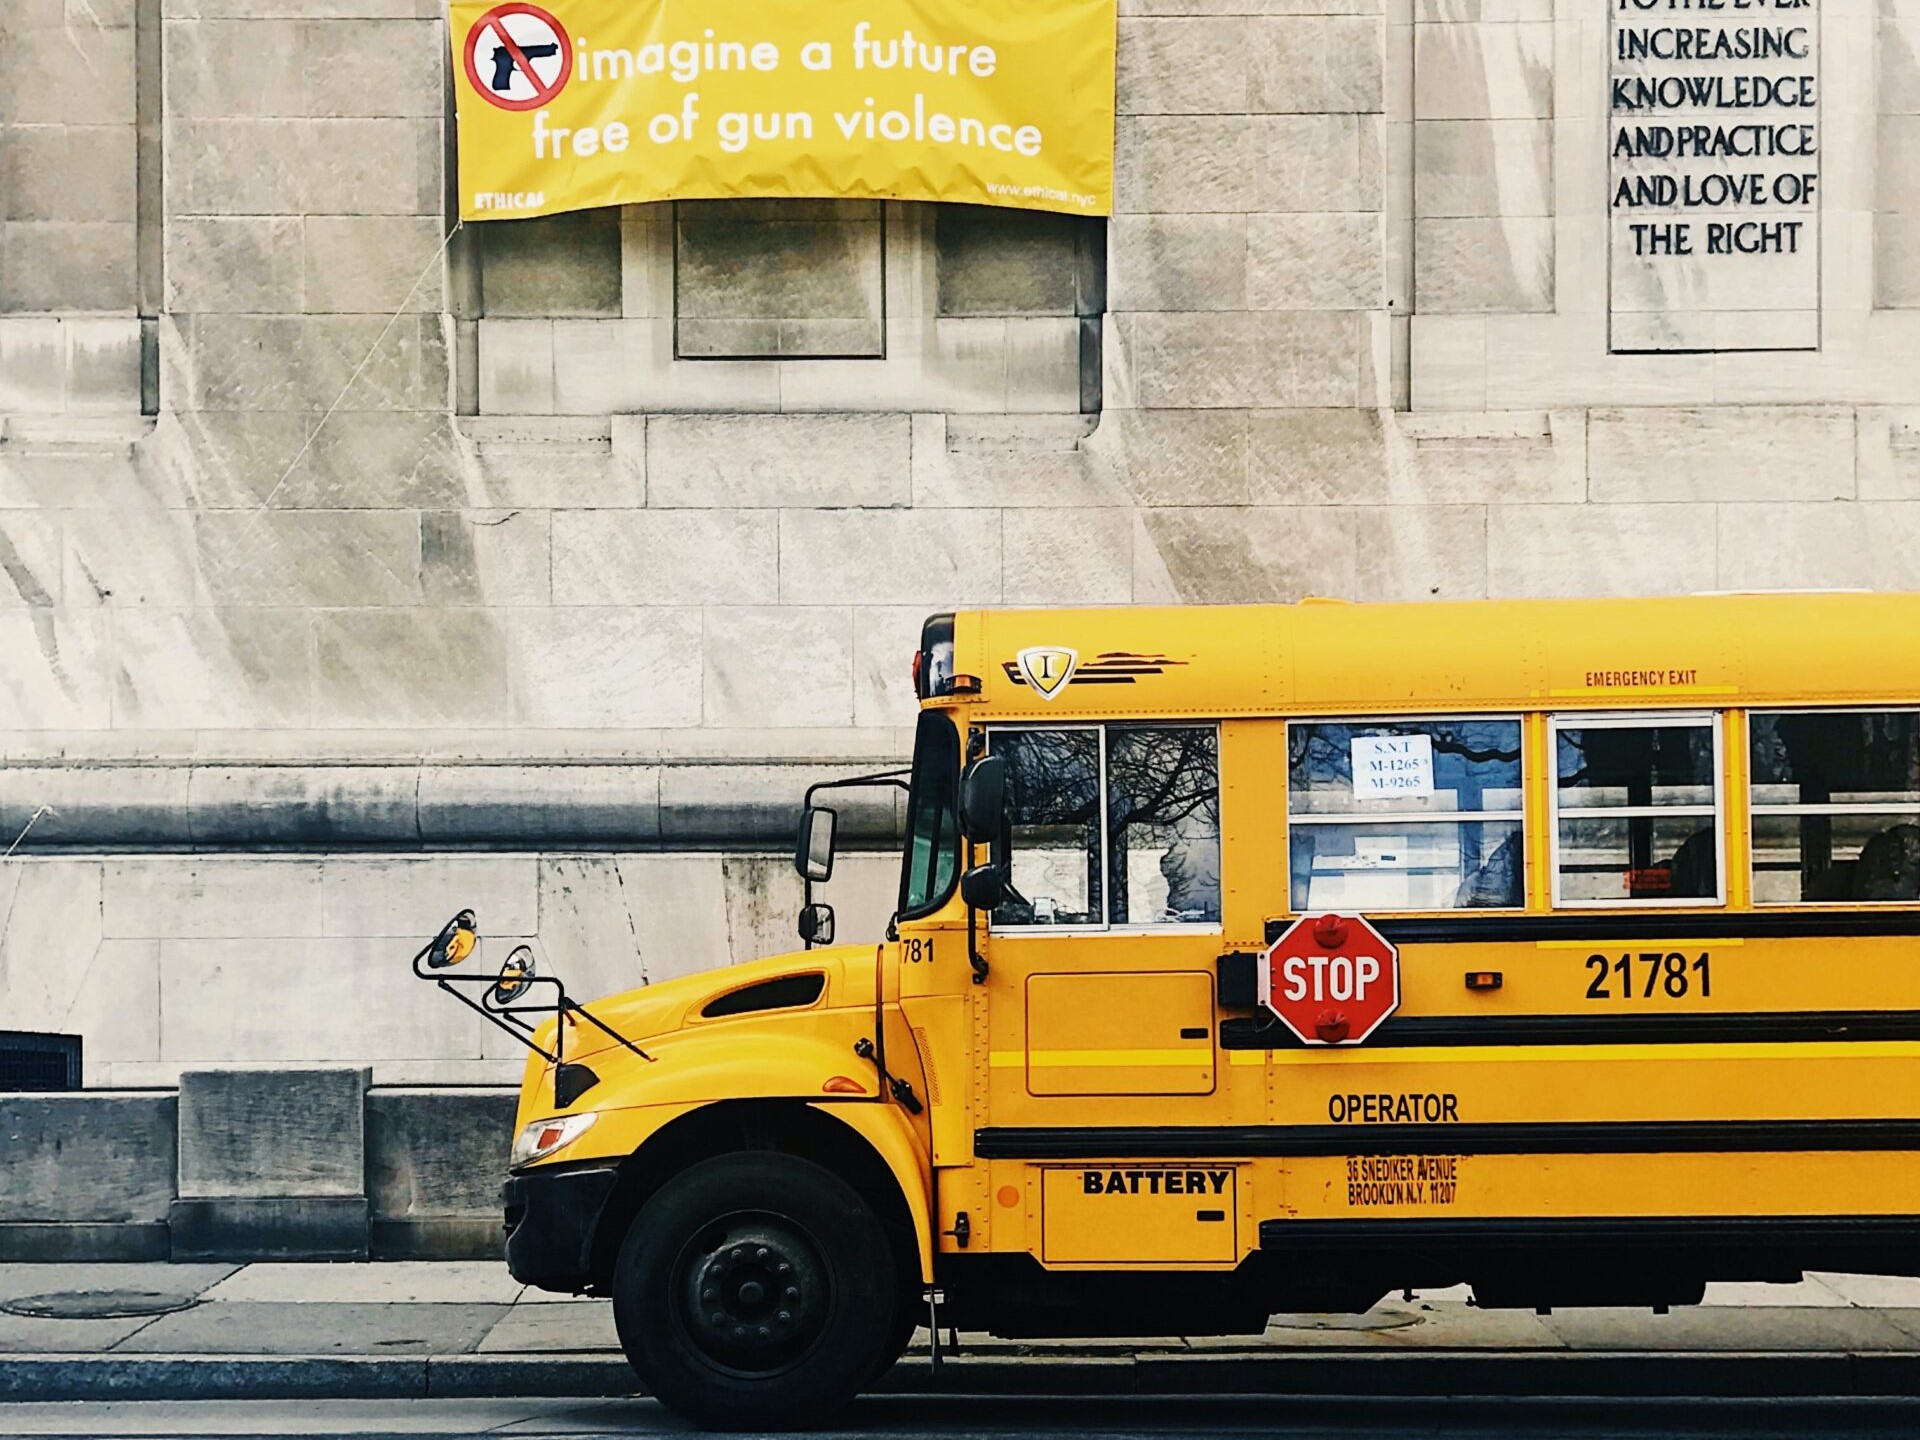 School bus in front of sign "Imagine a future free of gun violence"